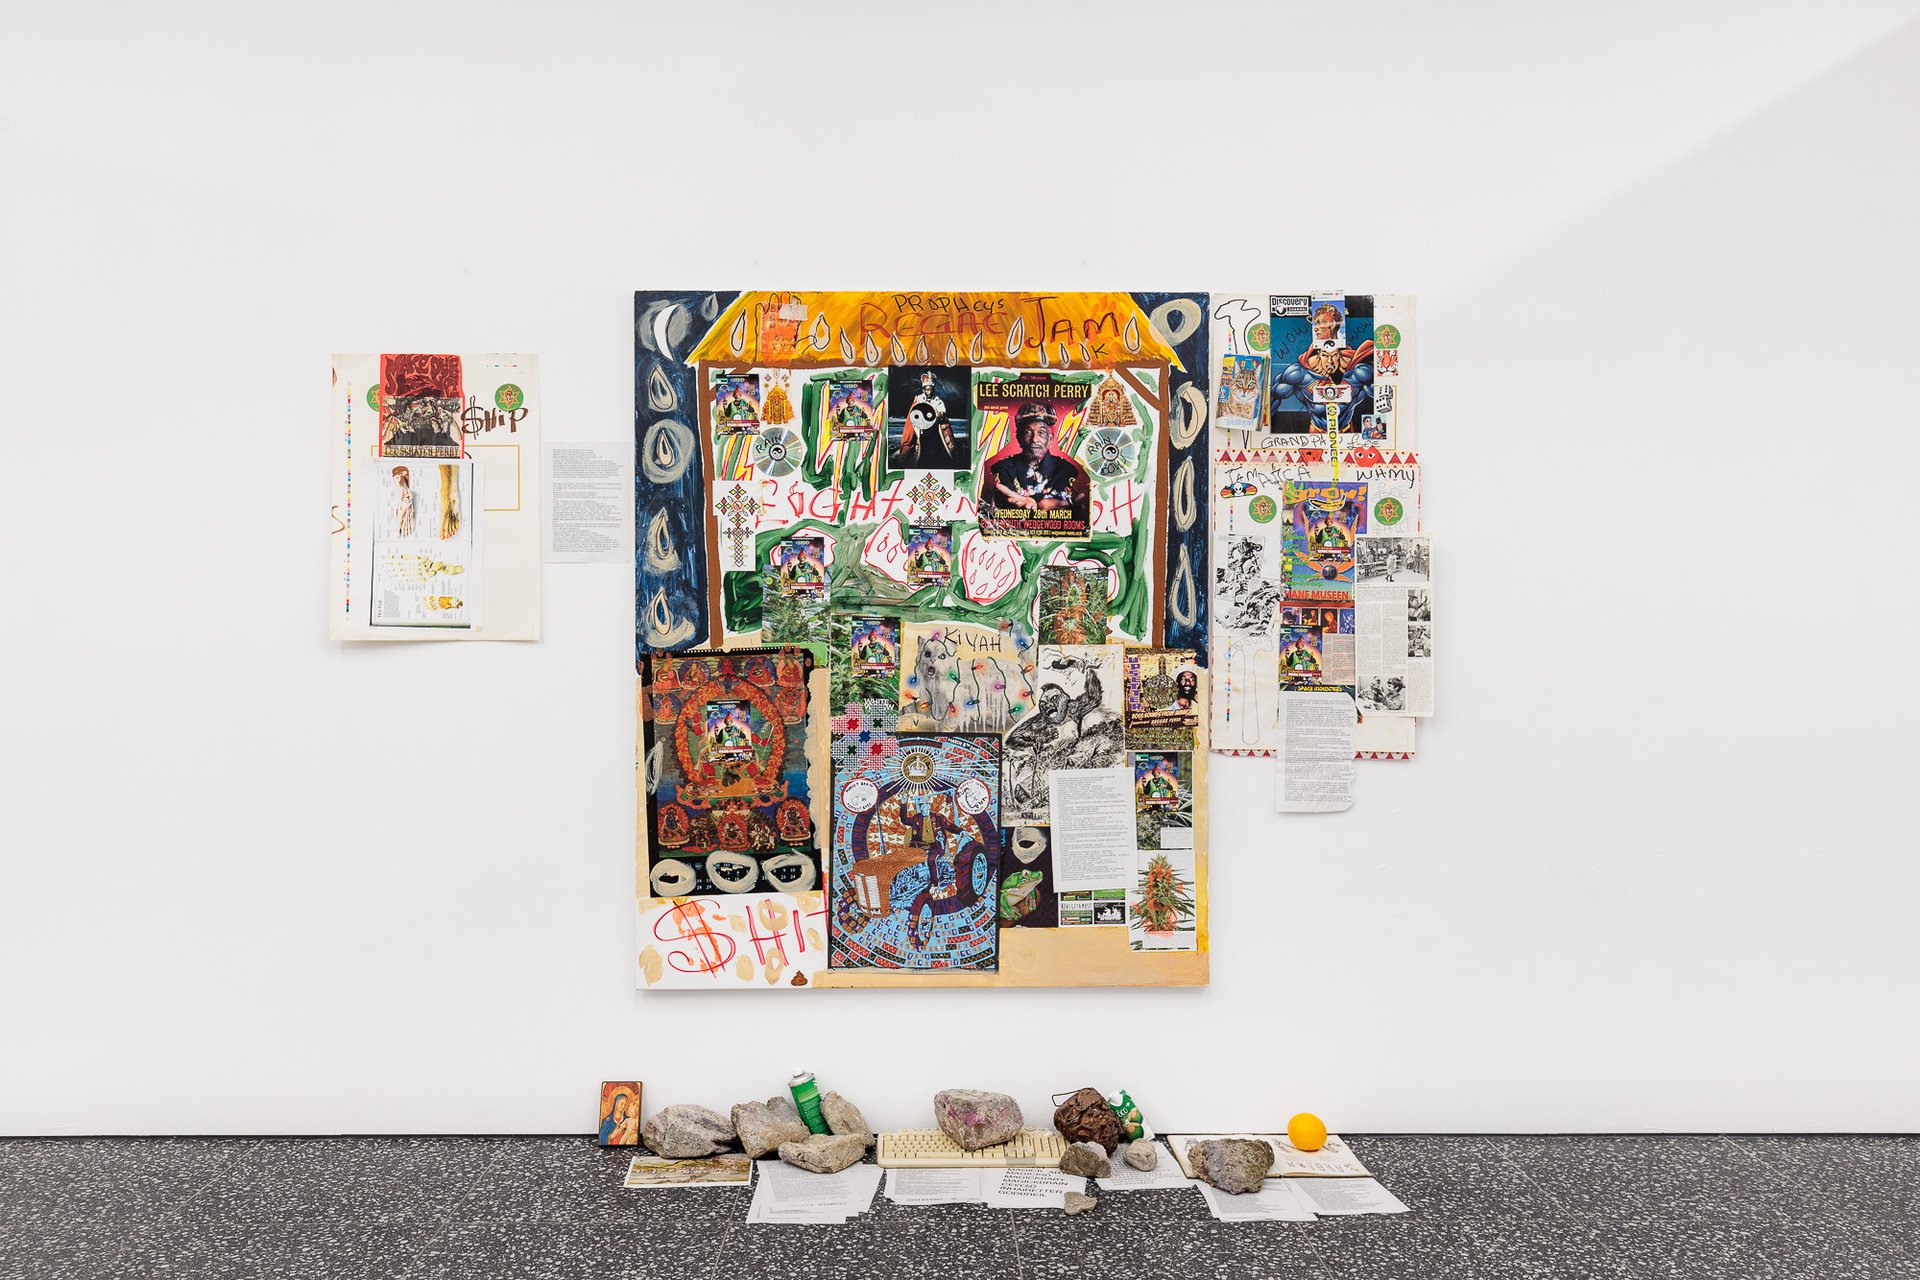 Lee Scratch PerryNativity Painting (Regae Jam), 2018Collage and acrylic on canvas170 x 140 cm (with floor and wall installation)Courtesy suns.works / The Visual Estate of Lee Scratch Perry